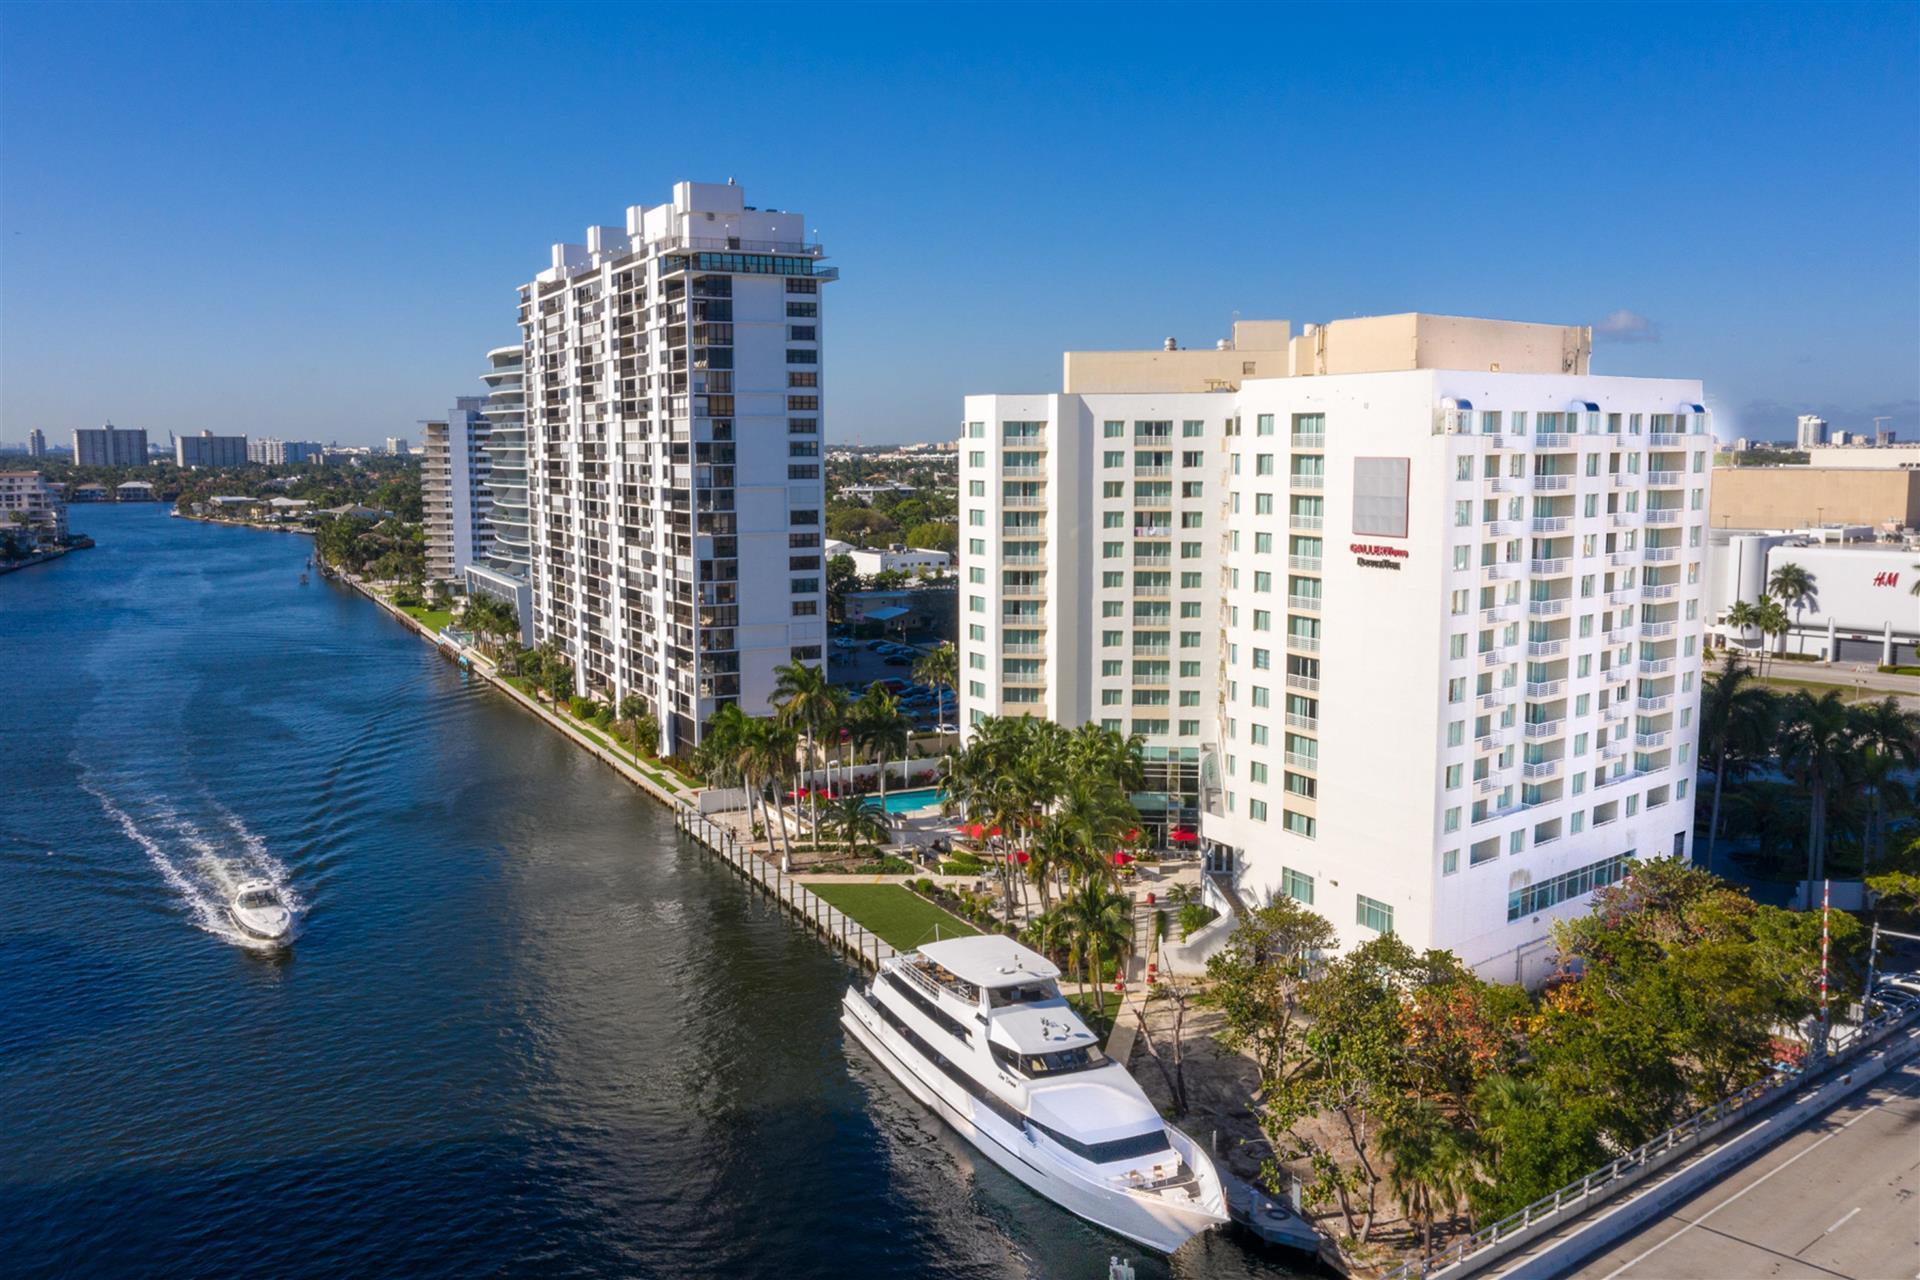 GALLERYone - a DoubleTree Suites by Hilton Hotel in Fort Lauderdale, FL